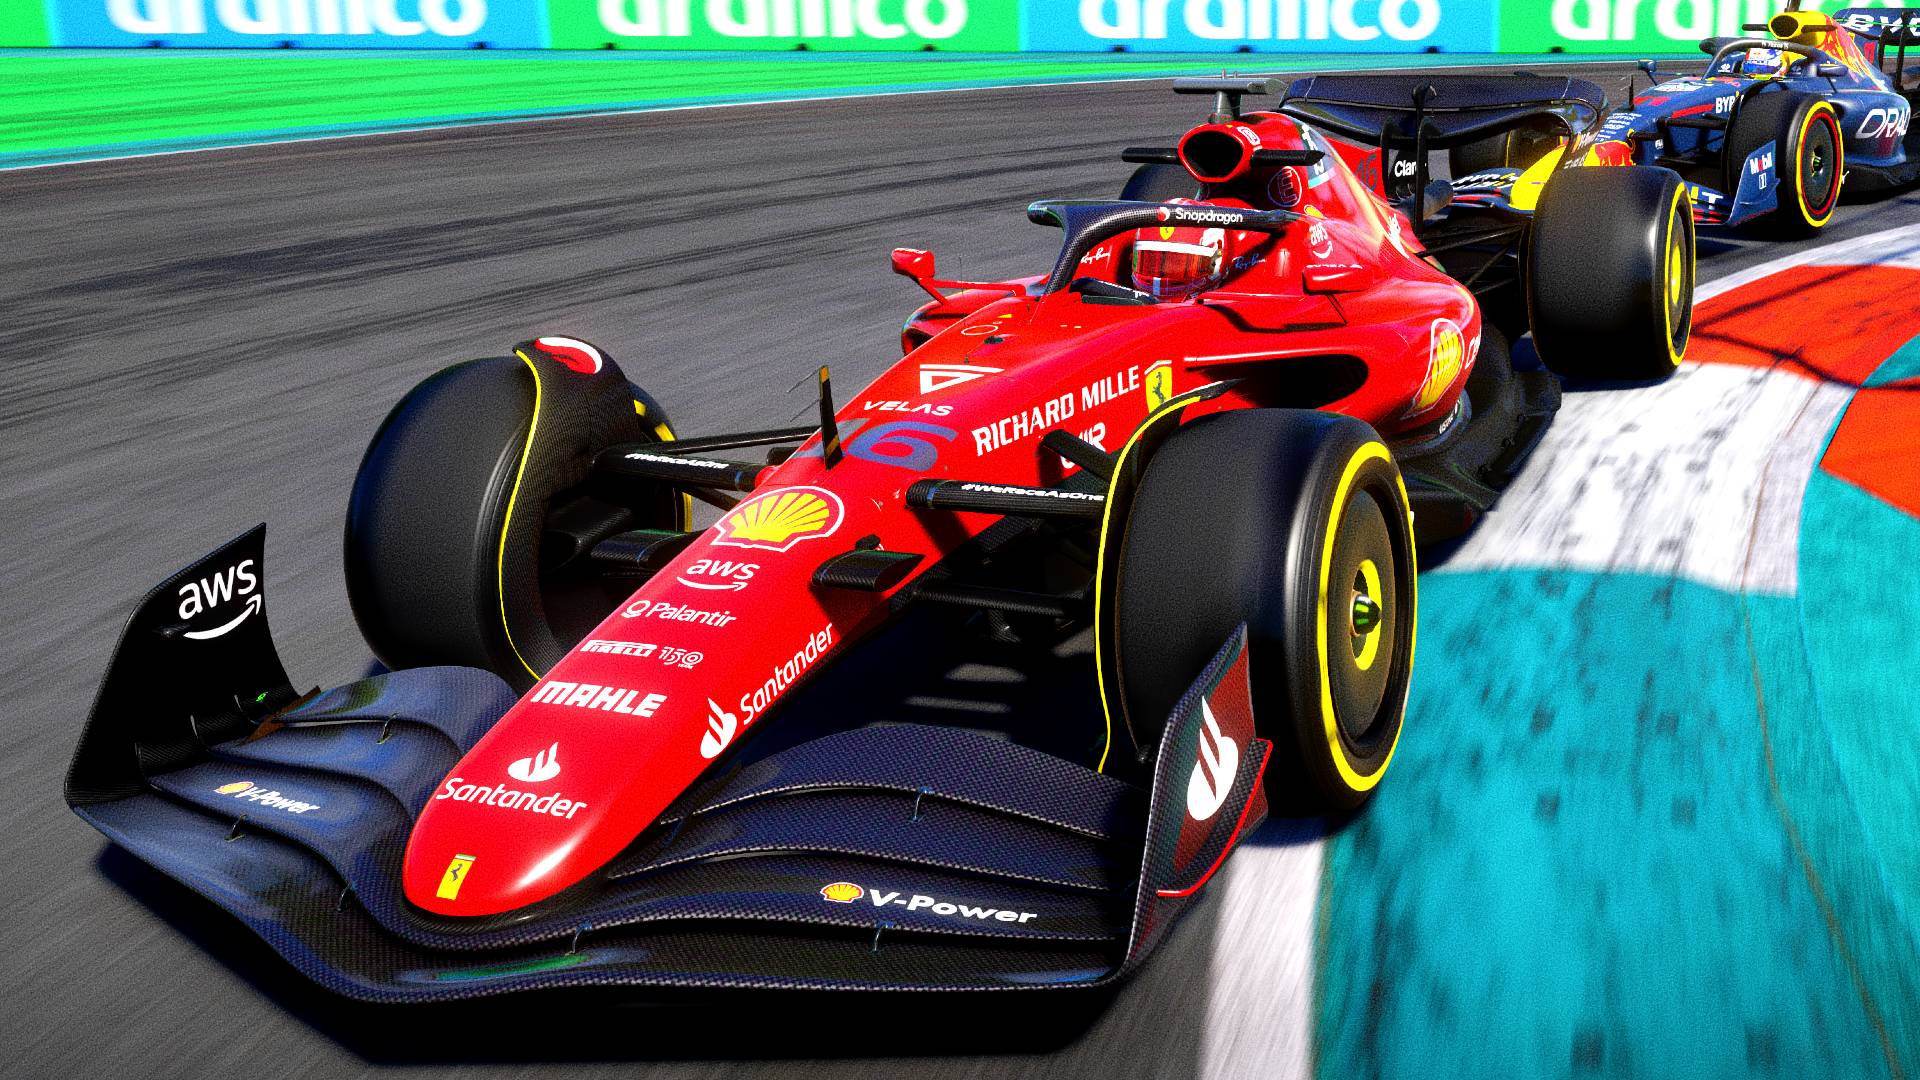 F1 23 track list: Which tracks are in the new Formula One game?